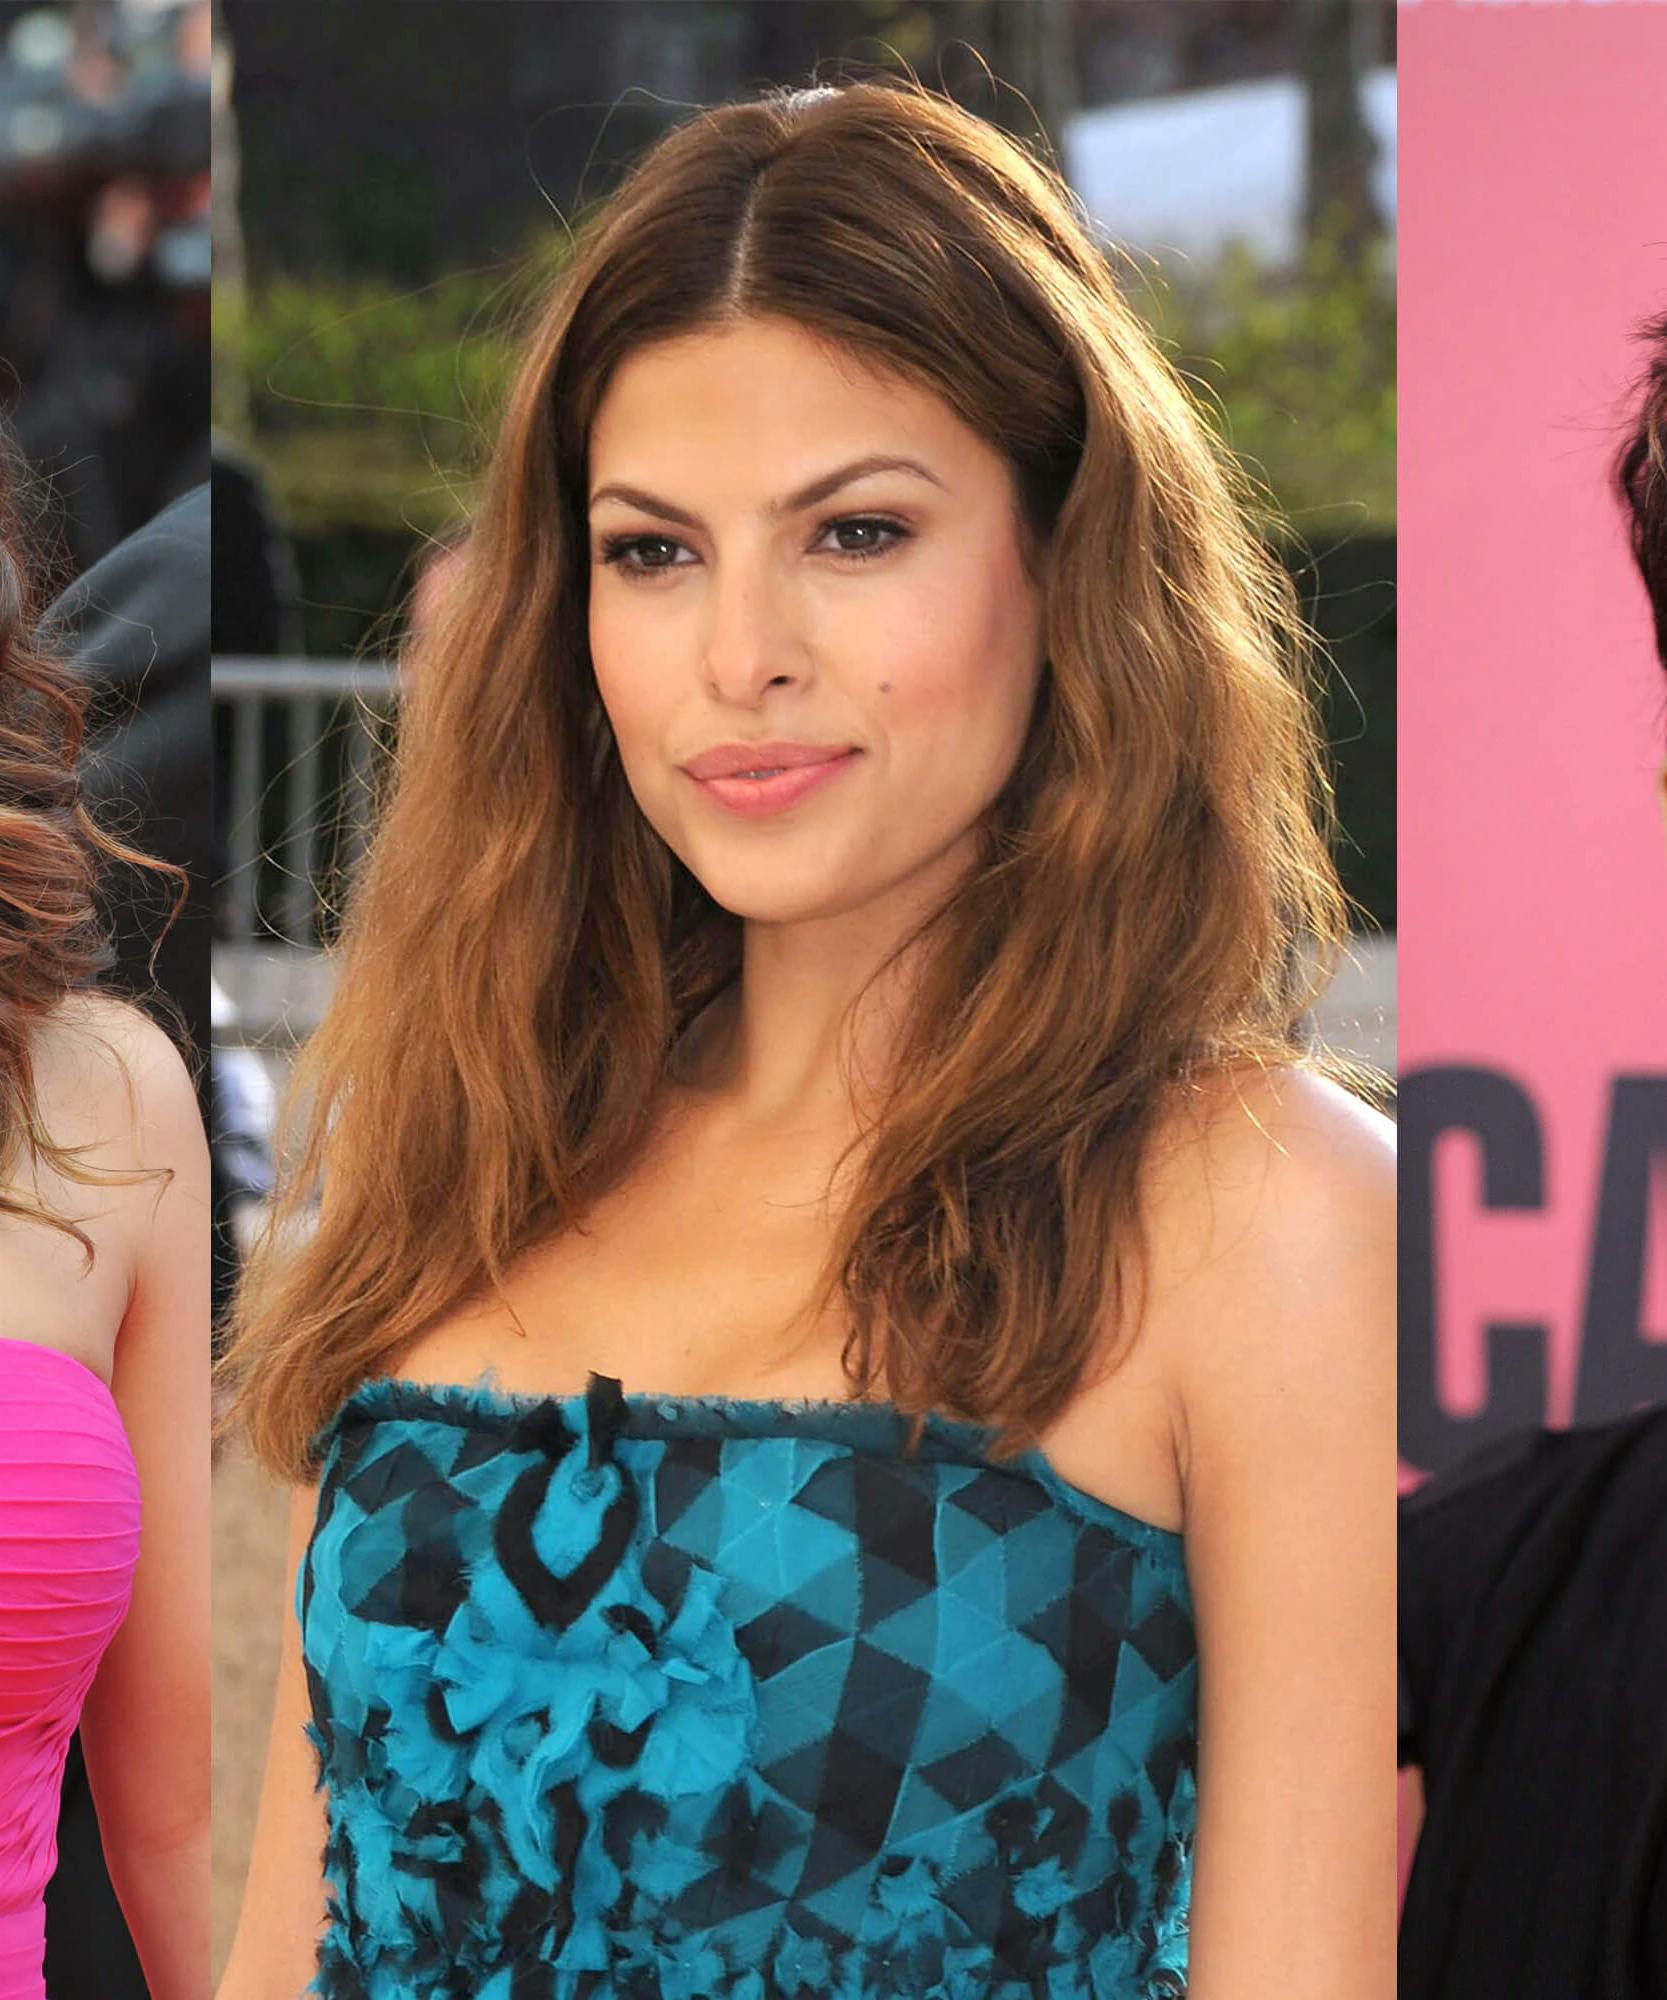 There's Still Hope: These Celebrity Moms Had Babies In Their 40s